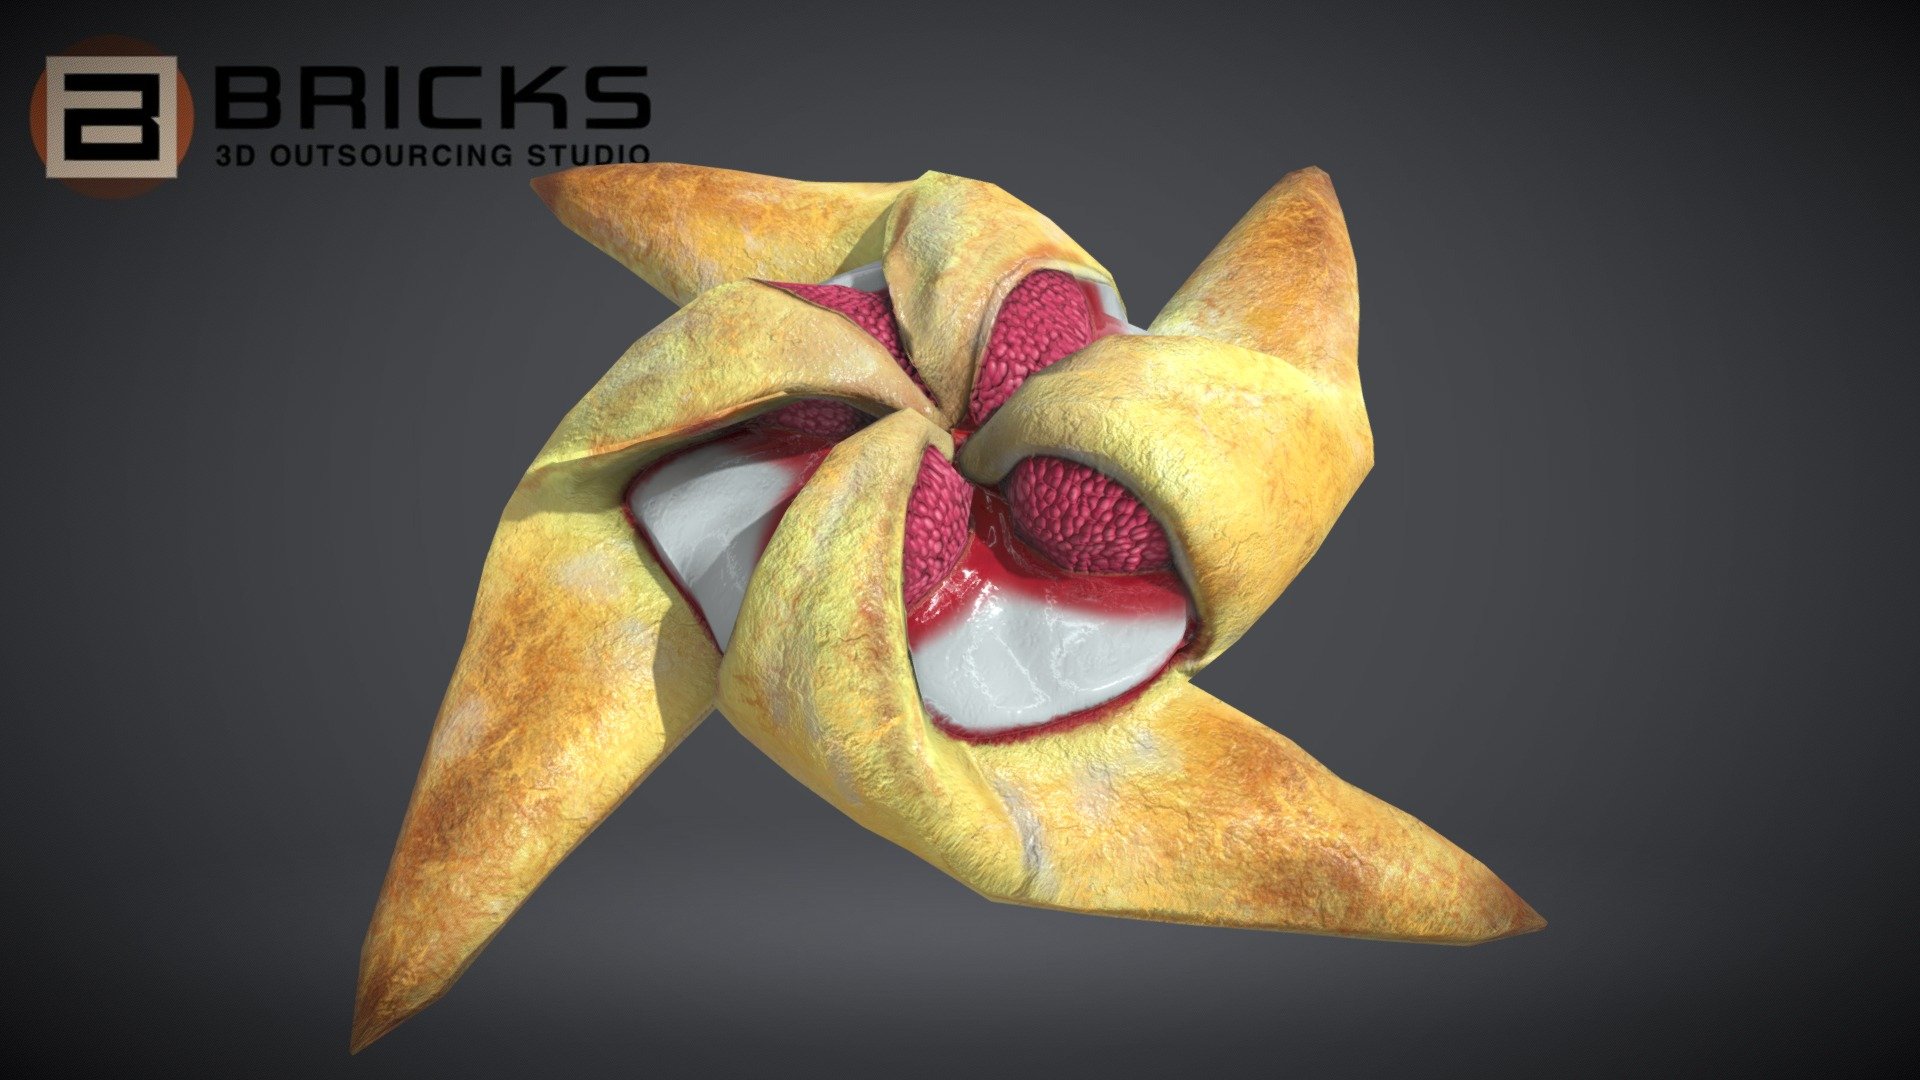 PBR Food Asset:
Raspberry Pastry
Polycount: 1180
Vertex count: 723
Texture Size: 2048px x 2048px
Normal: OpenGL

If you need any adjust in file please contact us: team@bricks3dstudio.com

Hire us: tringuyen@bricks3dstudio.com
Here is us: https://www.bricks3dstudio.com/
        https://www.artstation.com/bricksstudio
        https://www.facebook.com/Bricks3dstudio/
        https://www.linkedin.com/in/bricks-studio-b10462252/ - Raspberry Pastry - Buy Royalty Free 3D model by Bricks Studio (@bricks3dstudio) 3d model